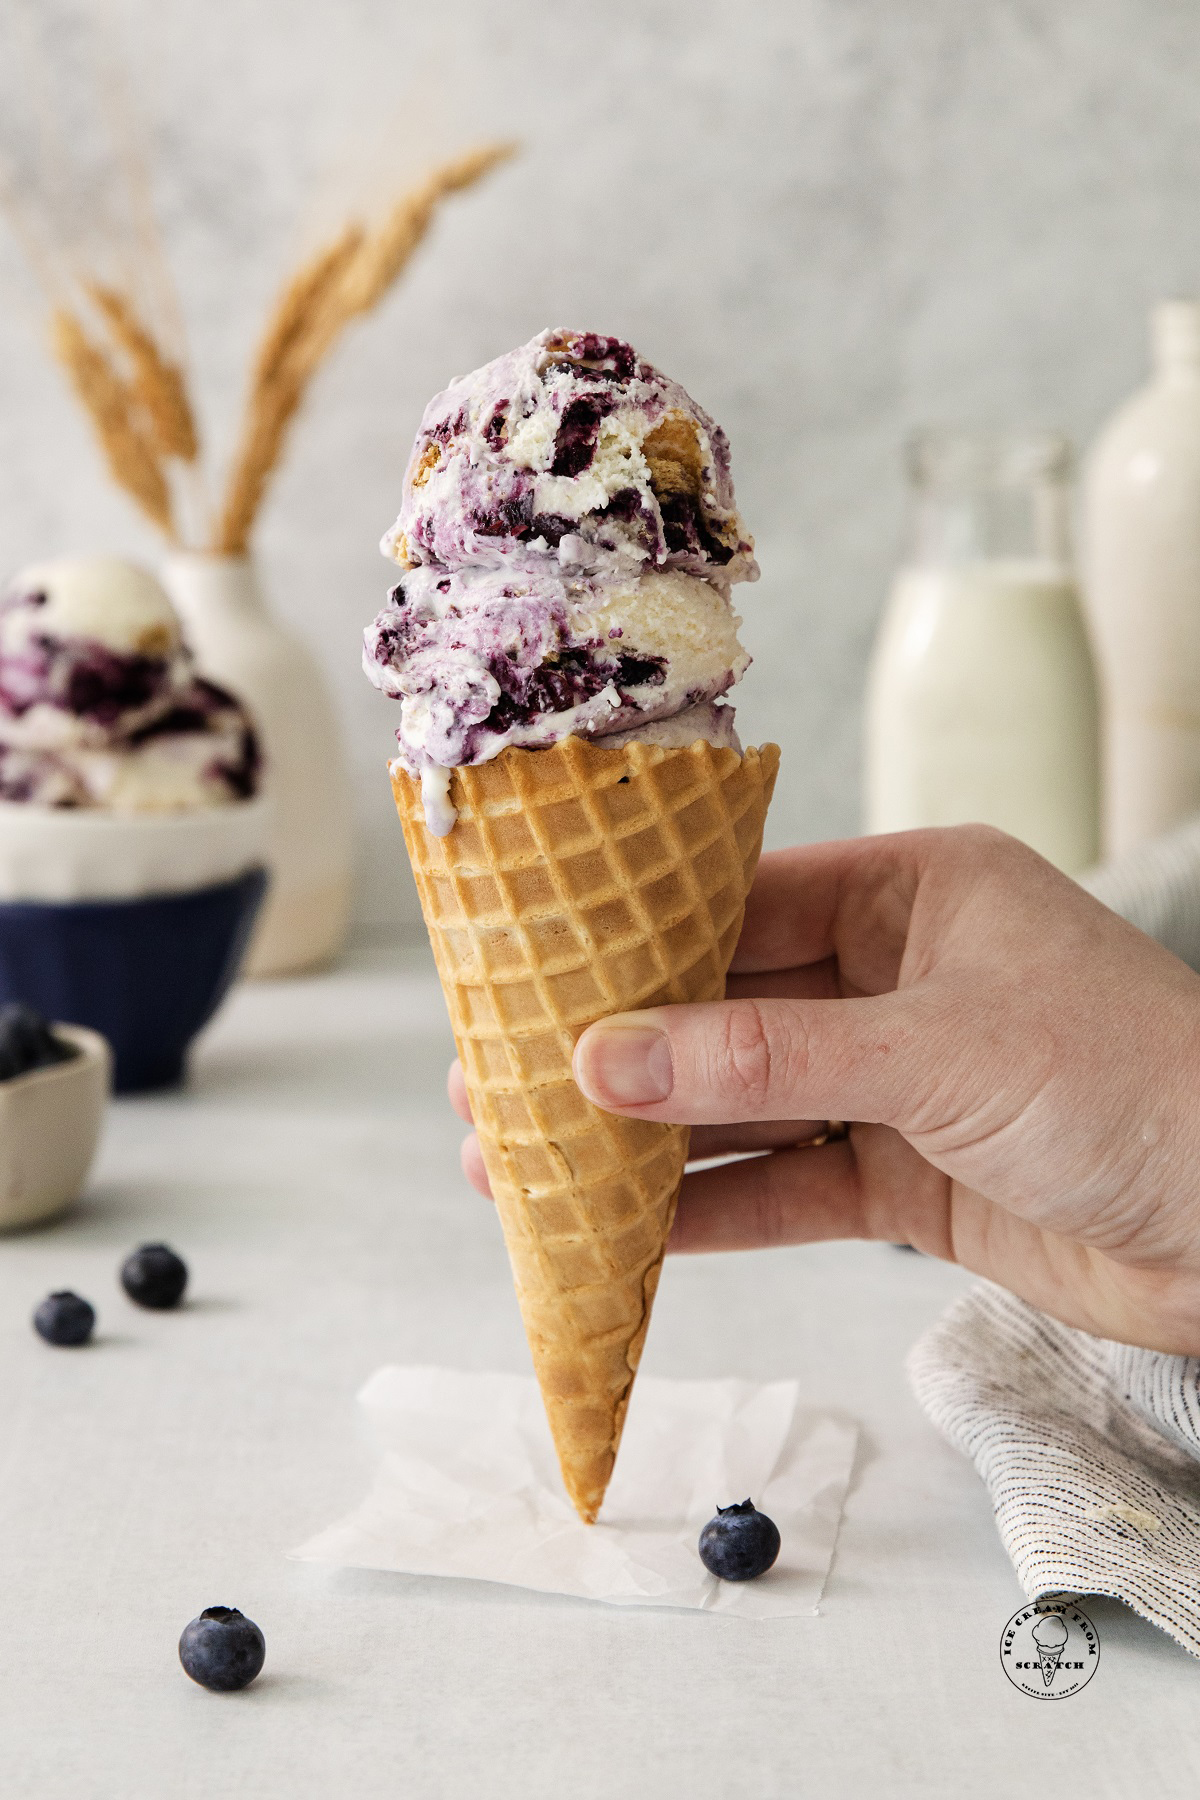 scoops of blueberry cheesecake ice cream in a waffle cone, held by a hand. Bottles of milk and cream are in the background